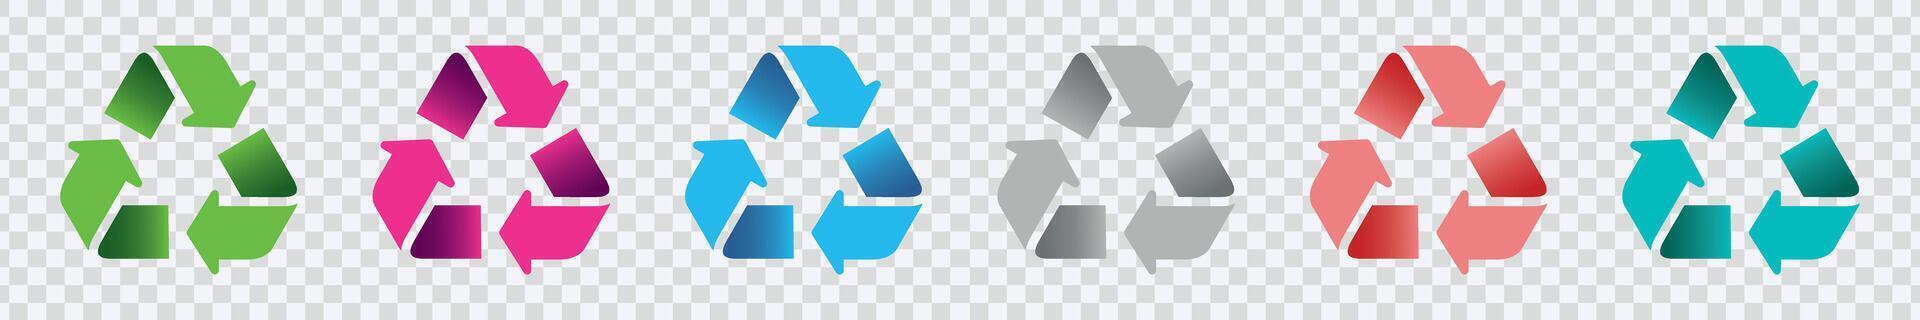 Illustrate eco-consciousness with vibrant recycling icons. Colorful symbols for sustainability vector